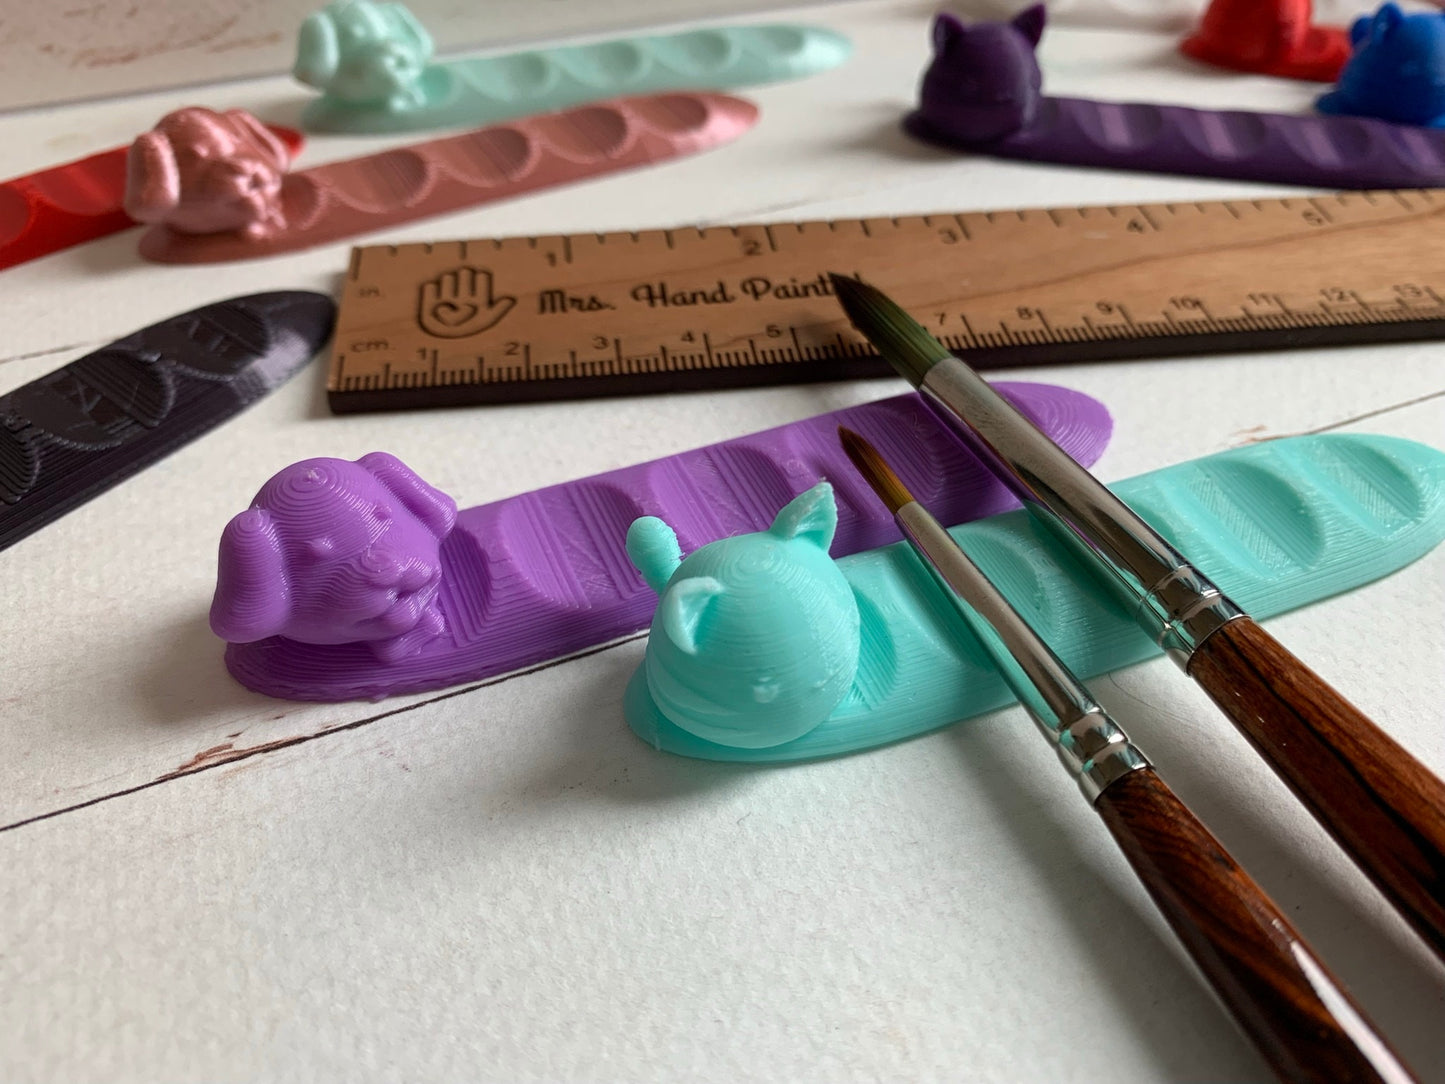 Cute Kitty Cat or Puppy Dog Paint Brush Rest -  PLA Bioplastic 3D Printed - for Watercolor / Acrylic / Oil Painting